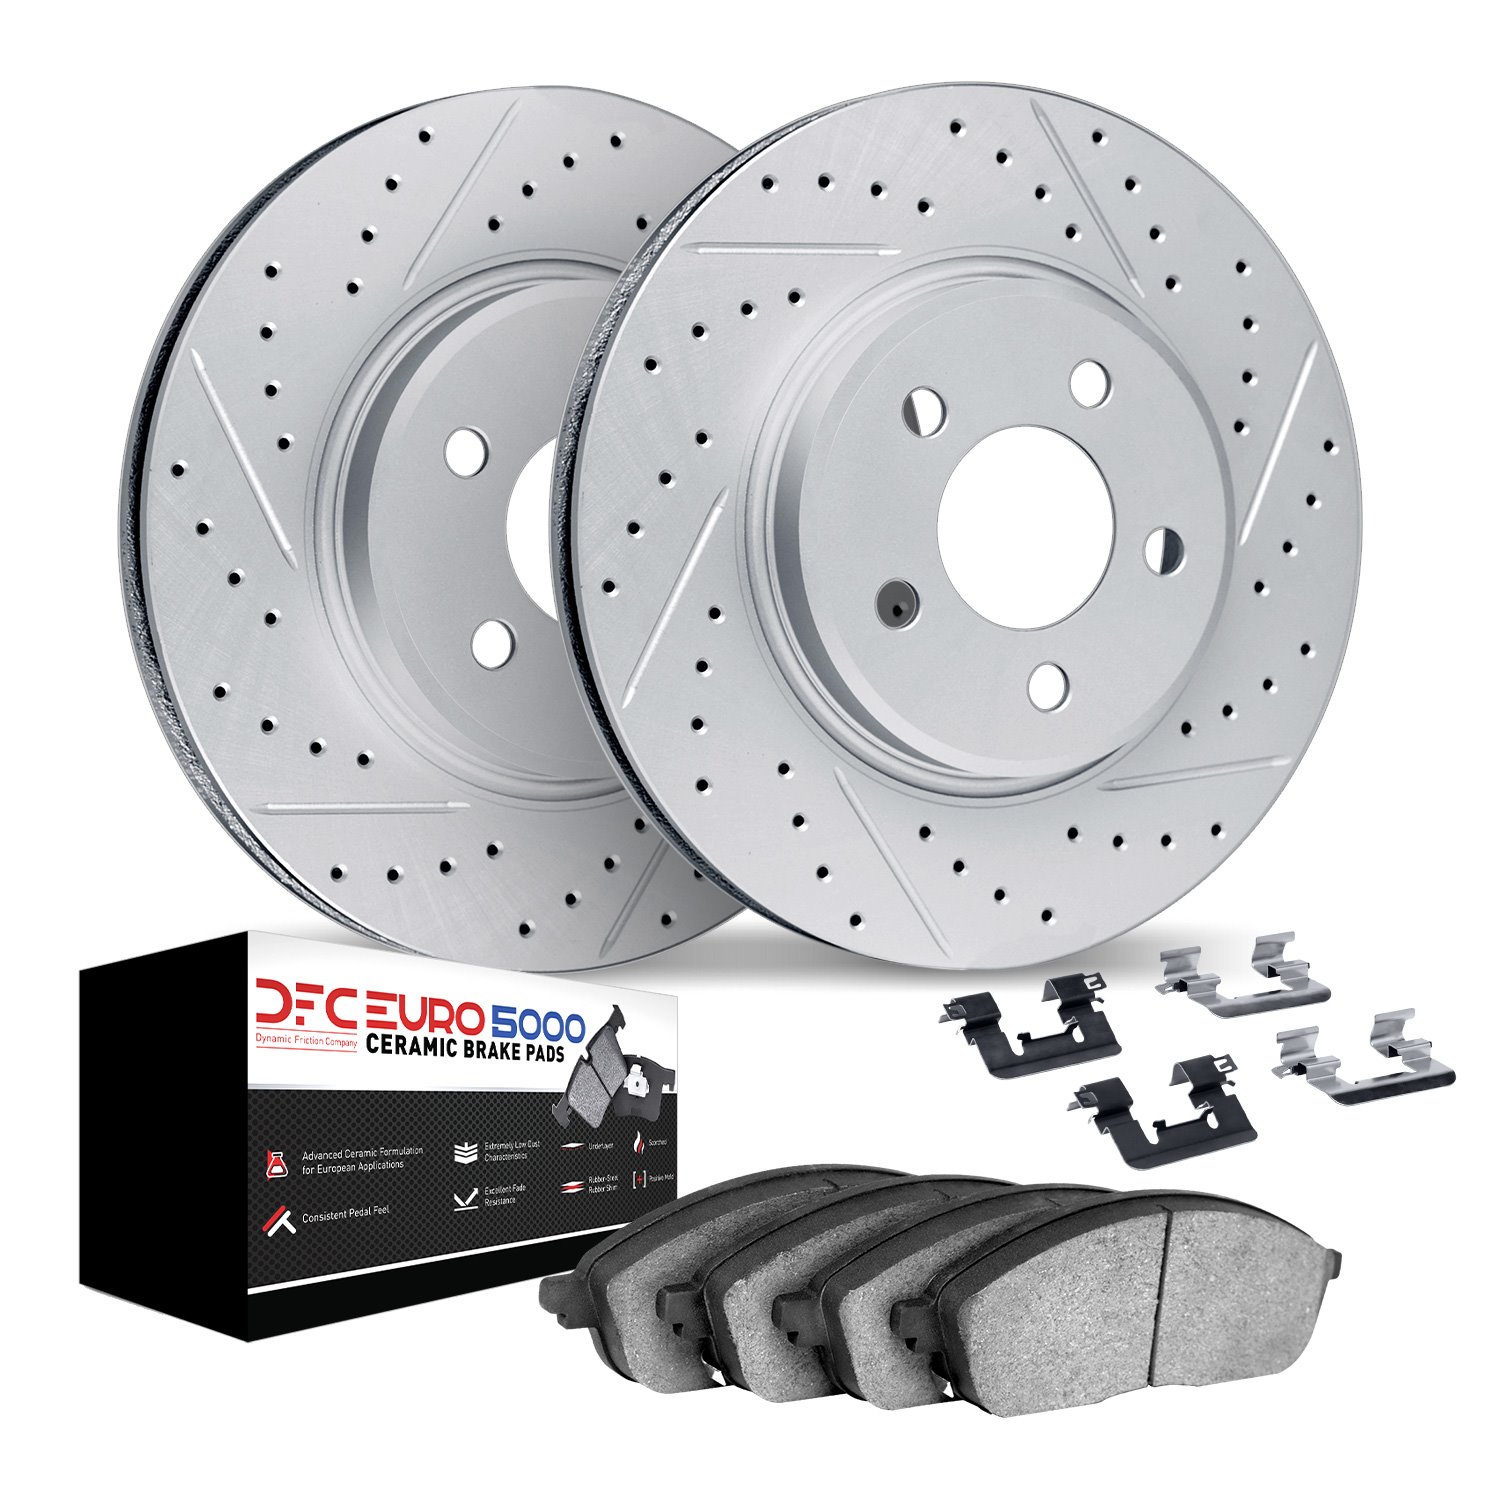 2612-54057 Geoperformance Drilled/Slotted Rotors w/5000 Euro Ceramic Brake Pads Kit & Hardware, 2004-2013 Volvo, Position: Front